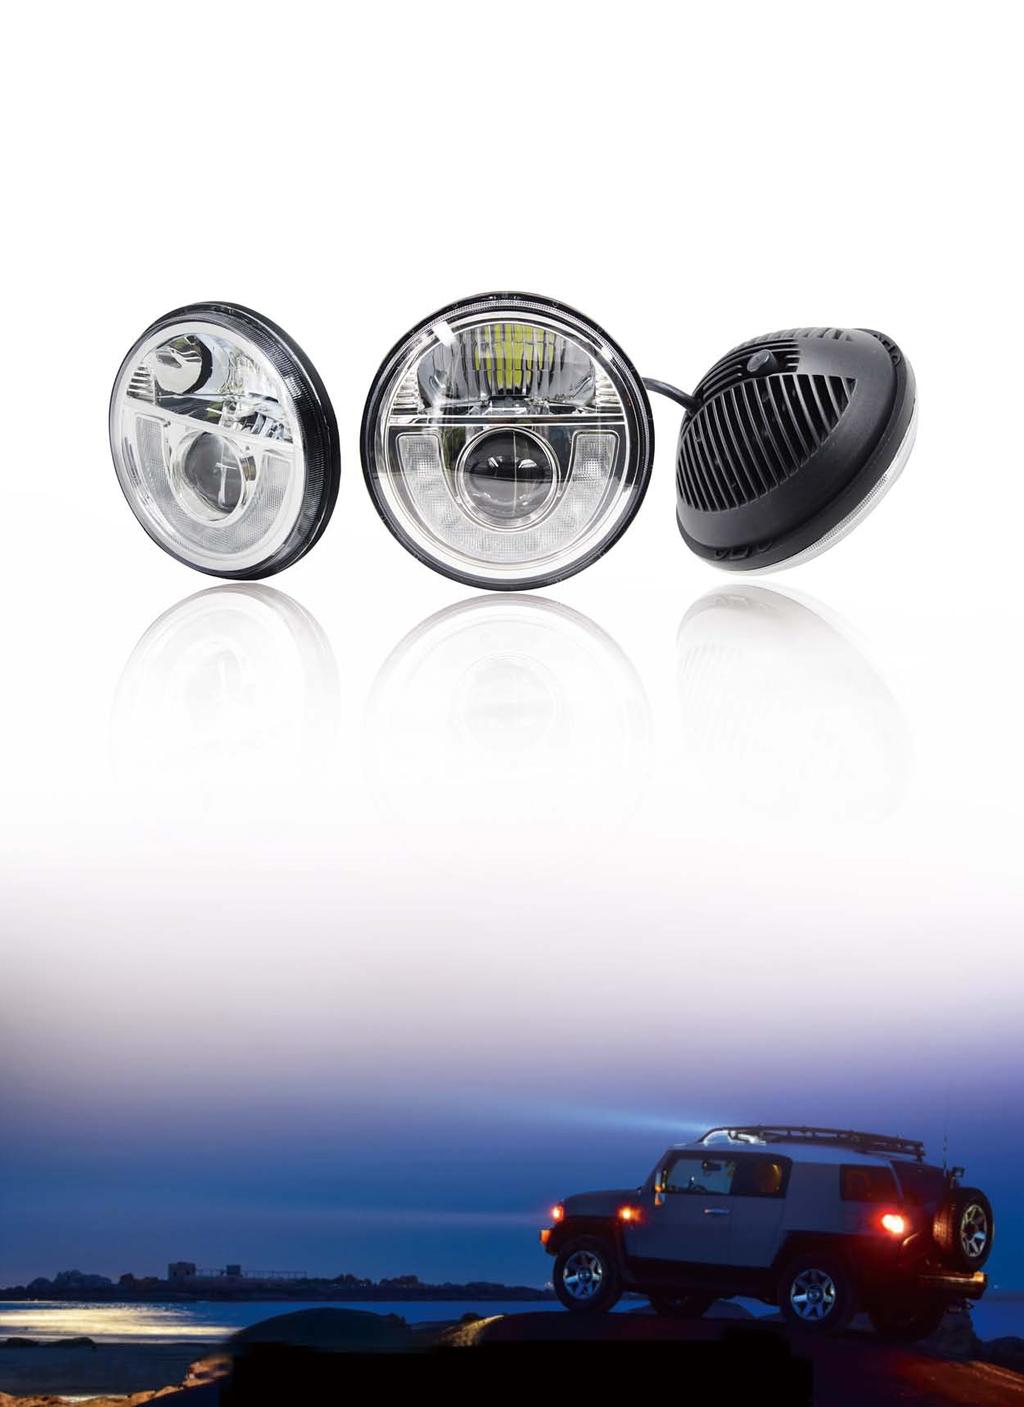 Excellent choice for off-road or on the road vehicles Filament-free LED light sources provide durable, dependable design not